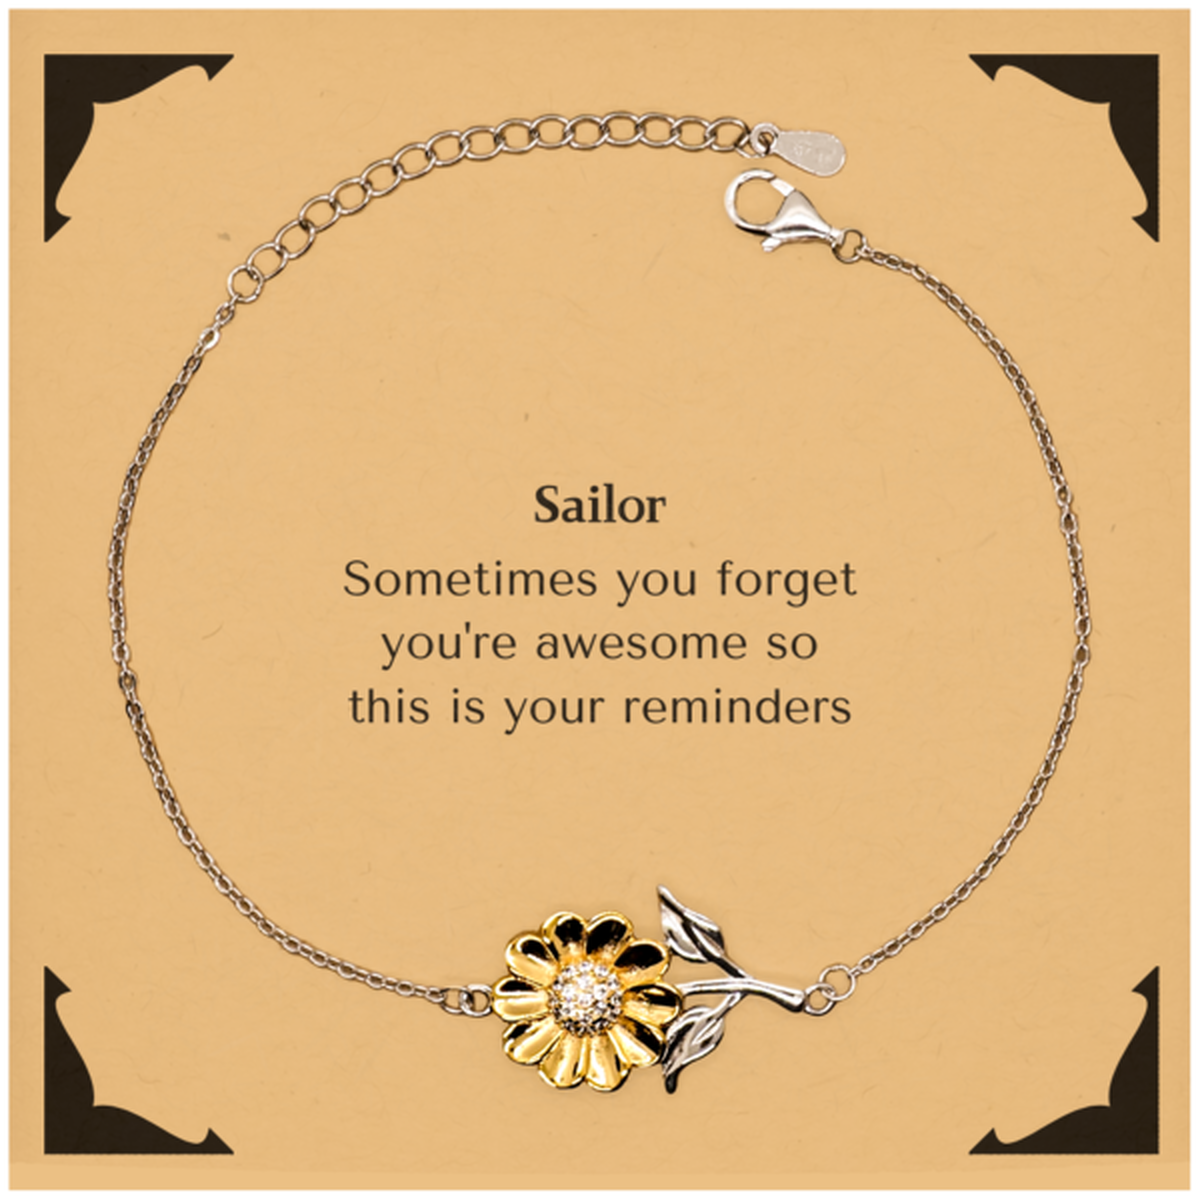 Sentimental Sailor Sunflower Bracelet, Sailor Sometimes you forget you're awesome so this is your reminders, Graduation Christmas Birthday Gifts for Sailor, Men, Women, Coworkers